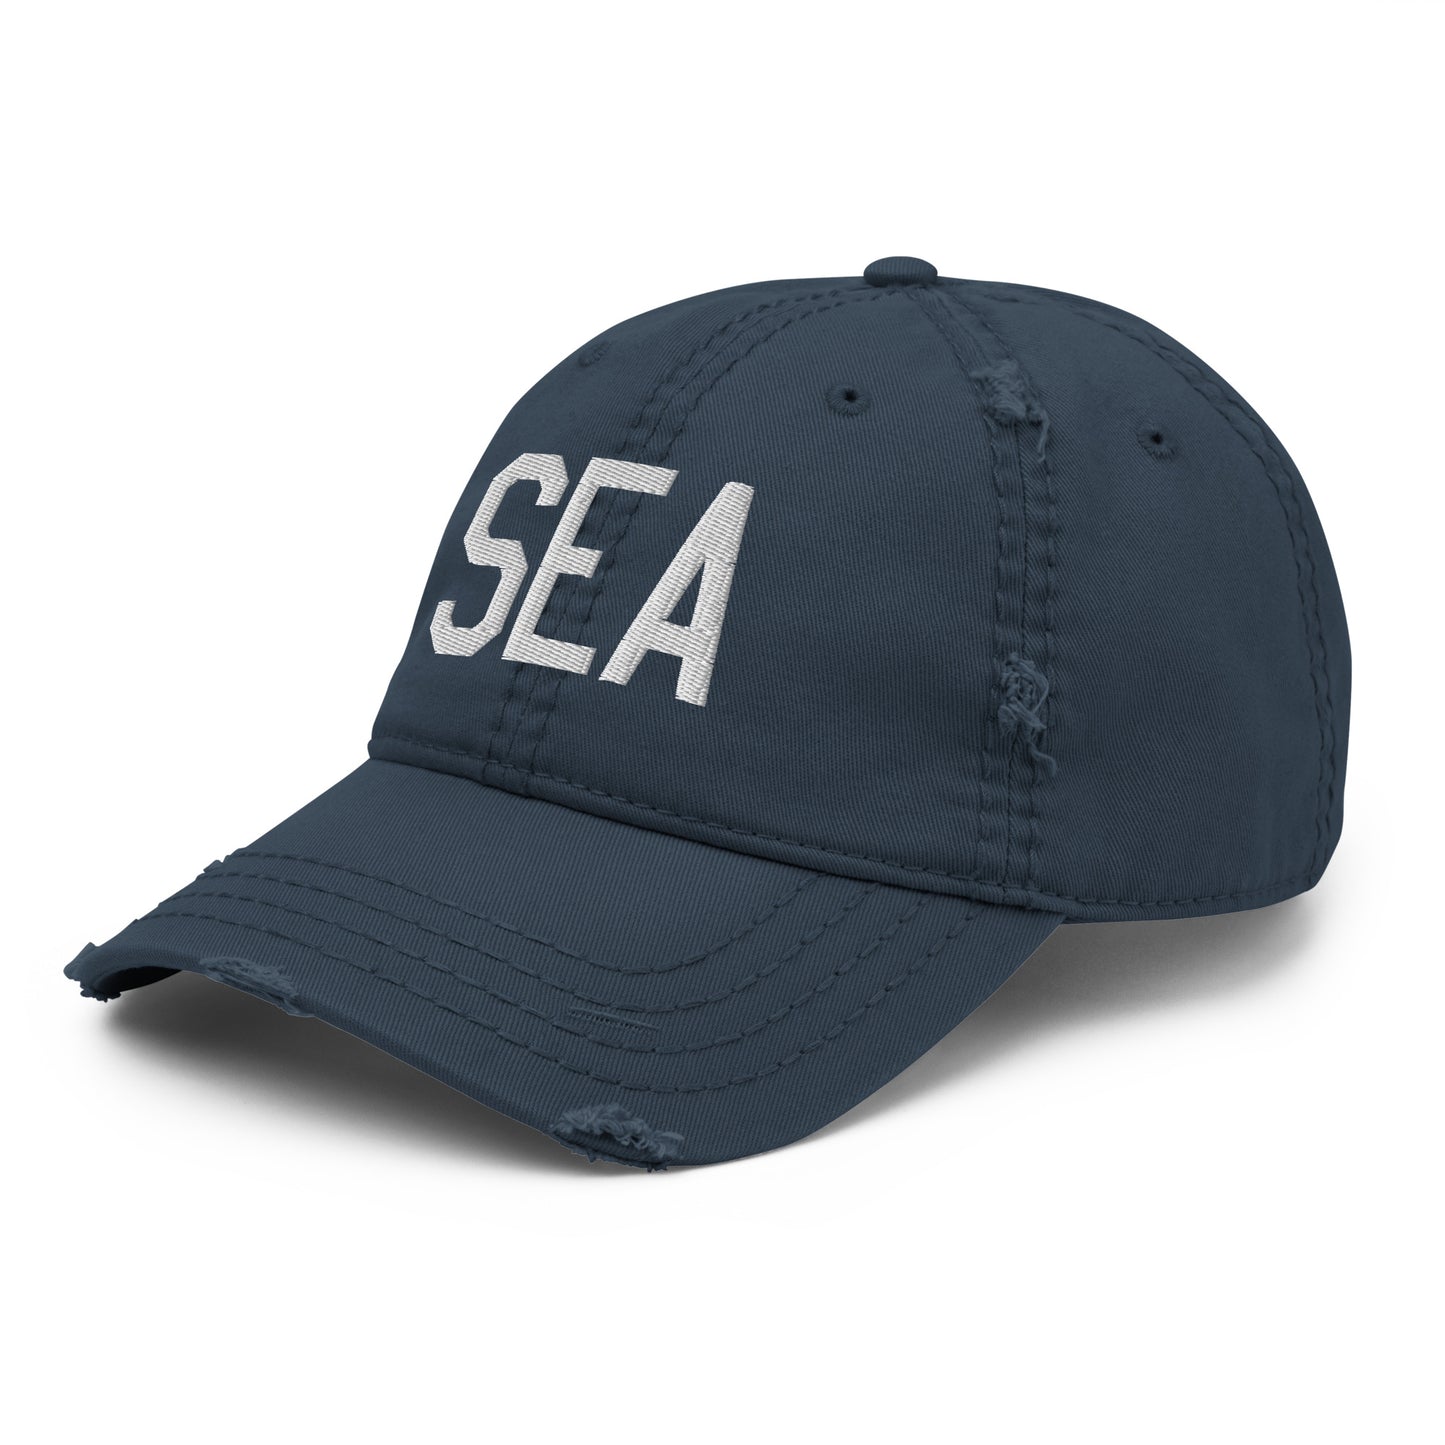 Airport Code Distressed Hat - White • SEA Seattle • YHM Designs - Image 01